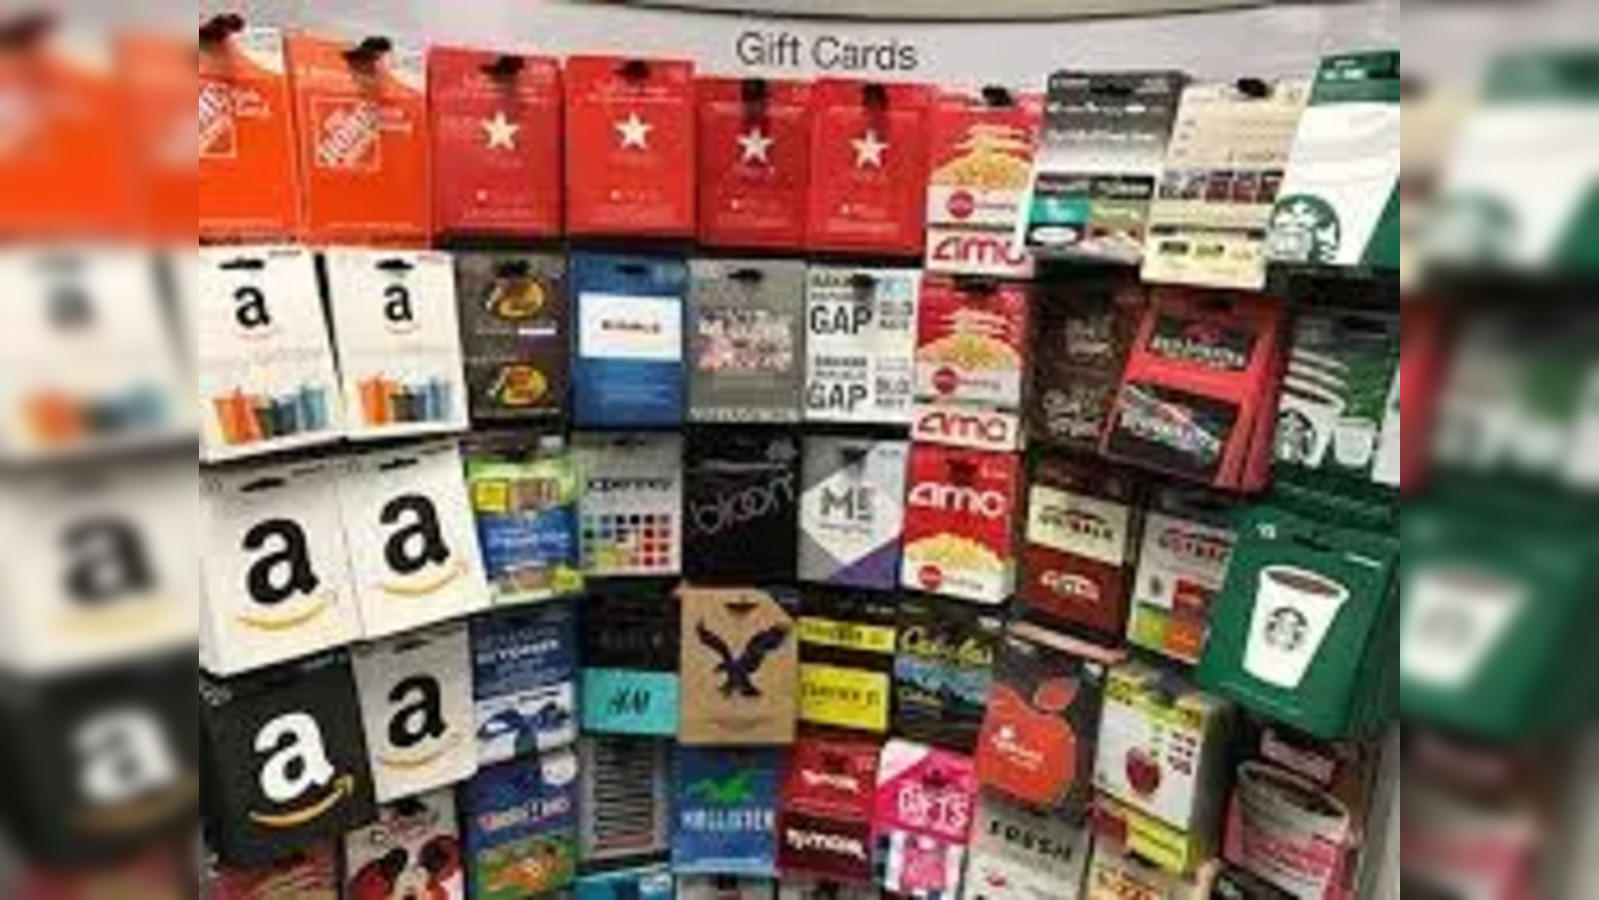 BHN Rewards on LinkedIn: International Gift Cards: The Ins and Outs | BHN  Rewards